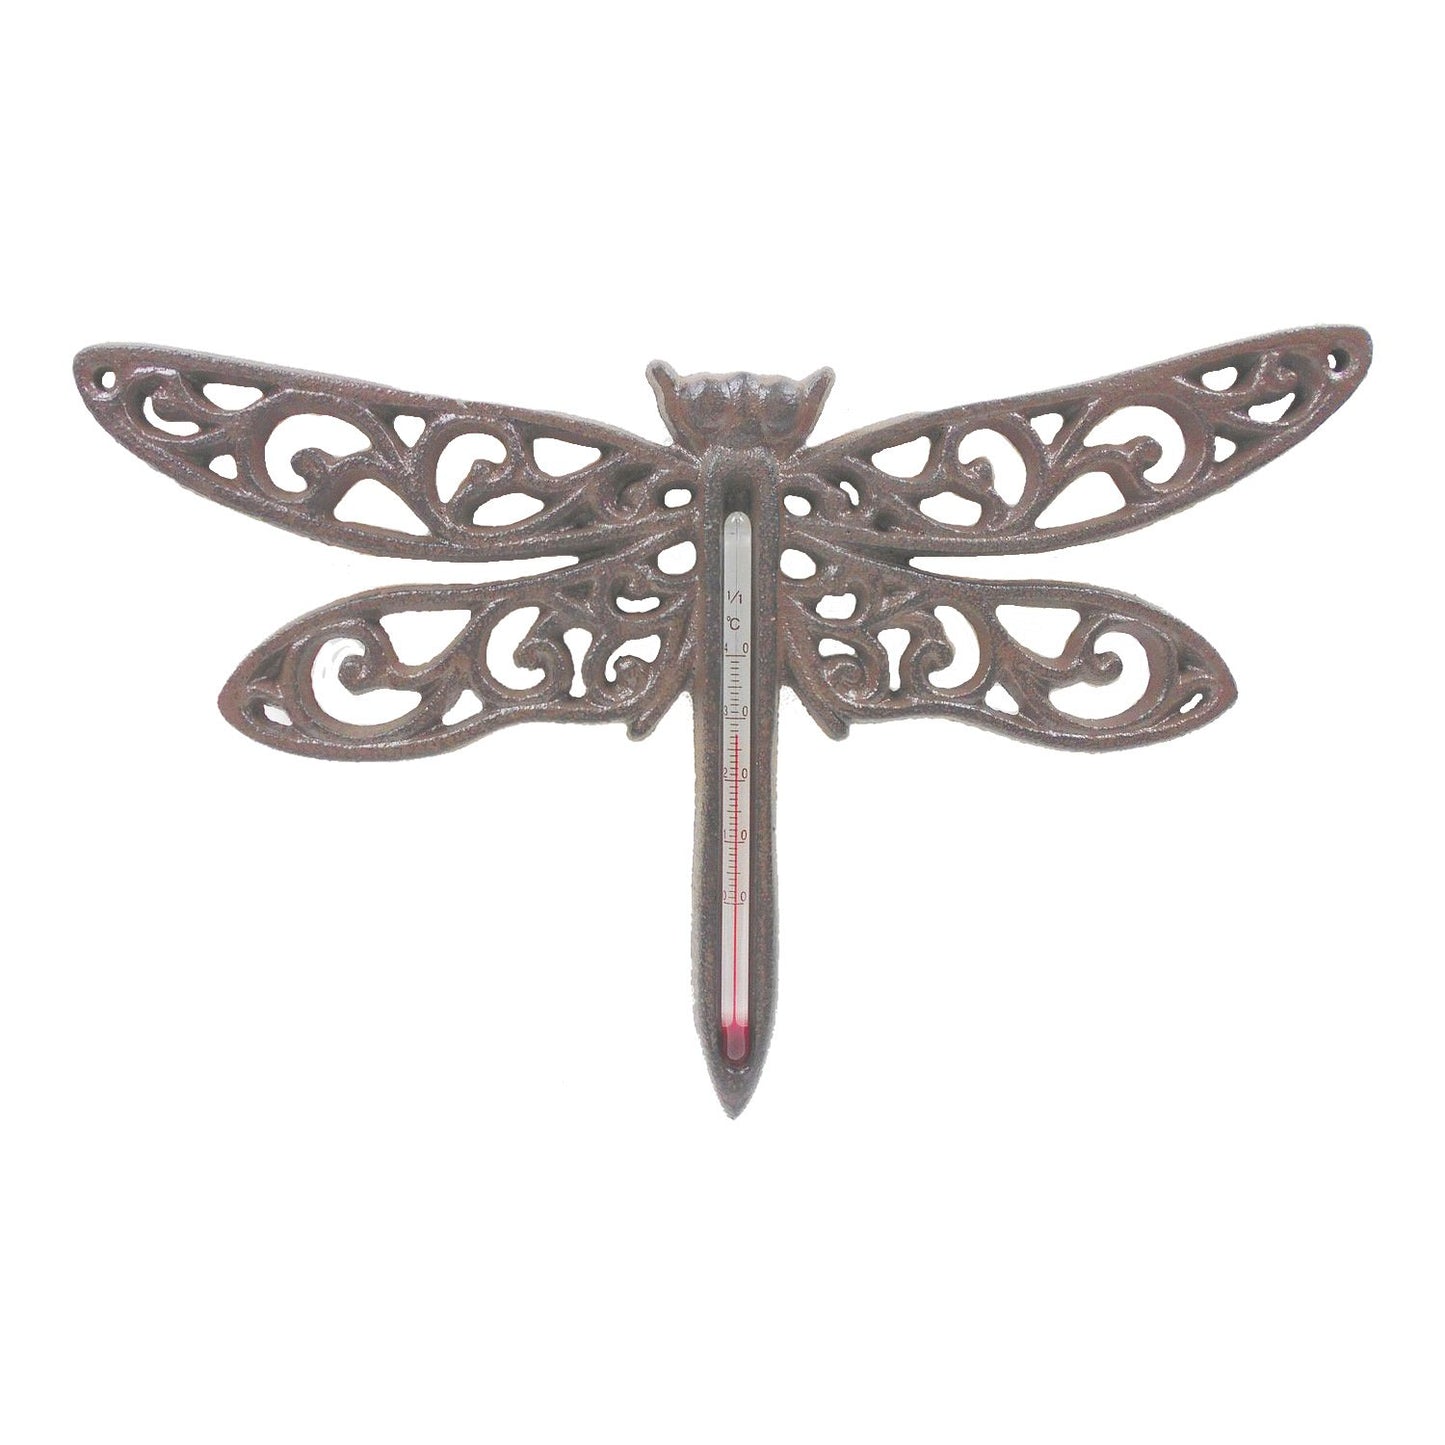 Cast iron Dragonfly garden thermometer wall hanging